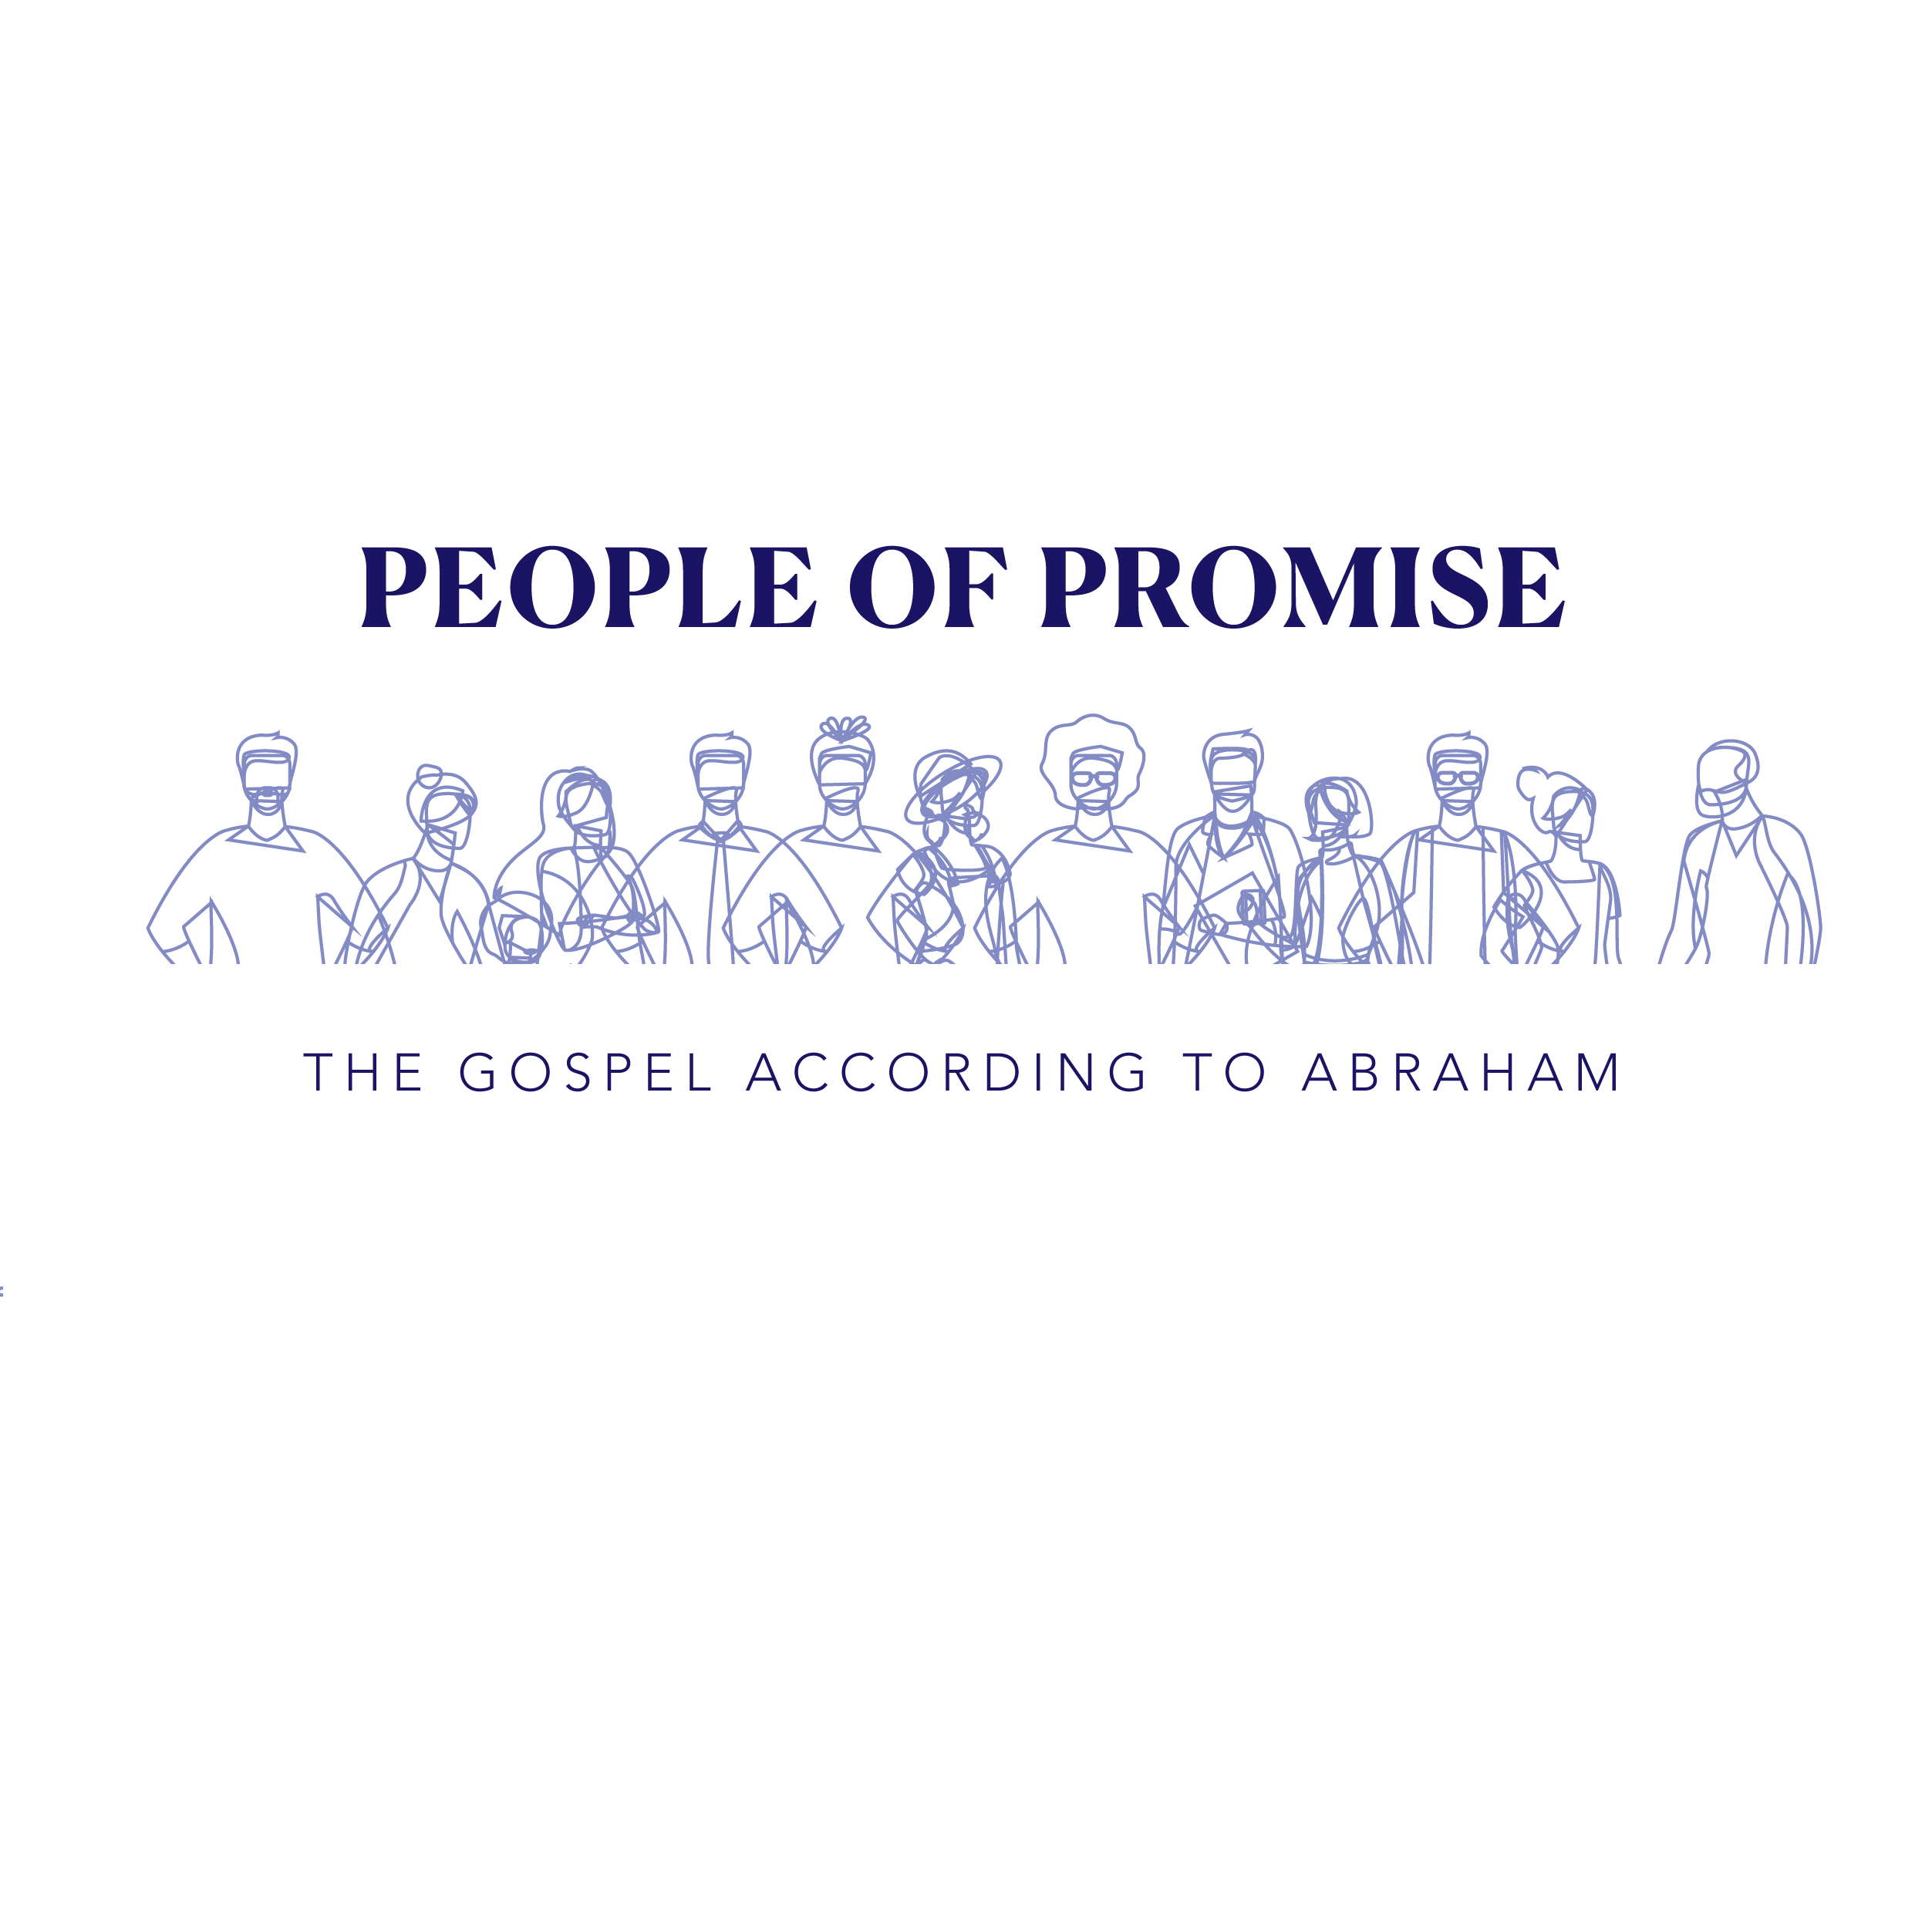 People of Promise: Abraham’s King